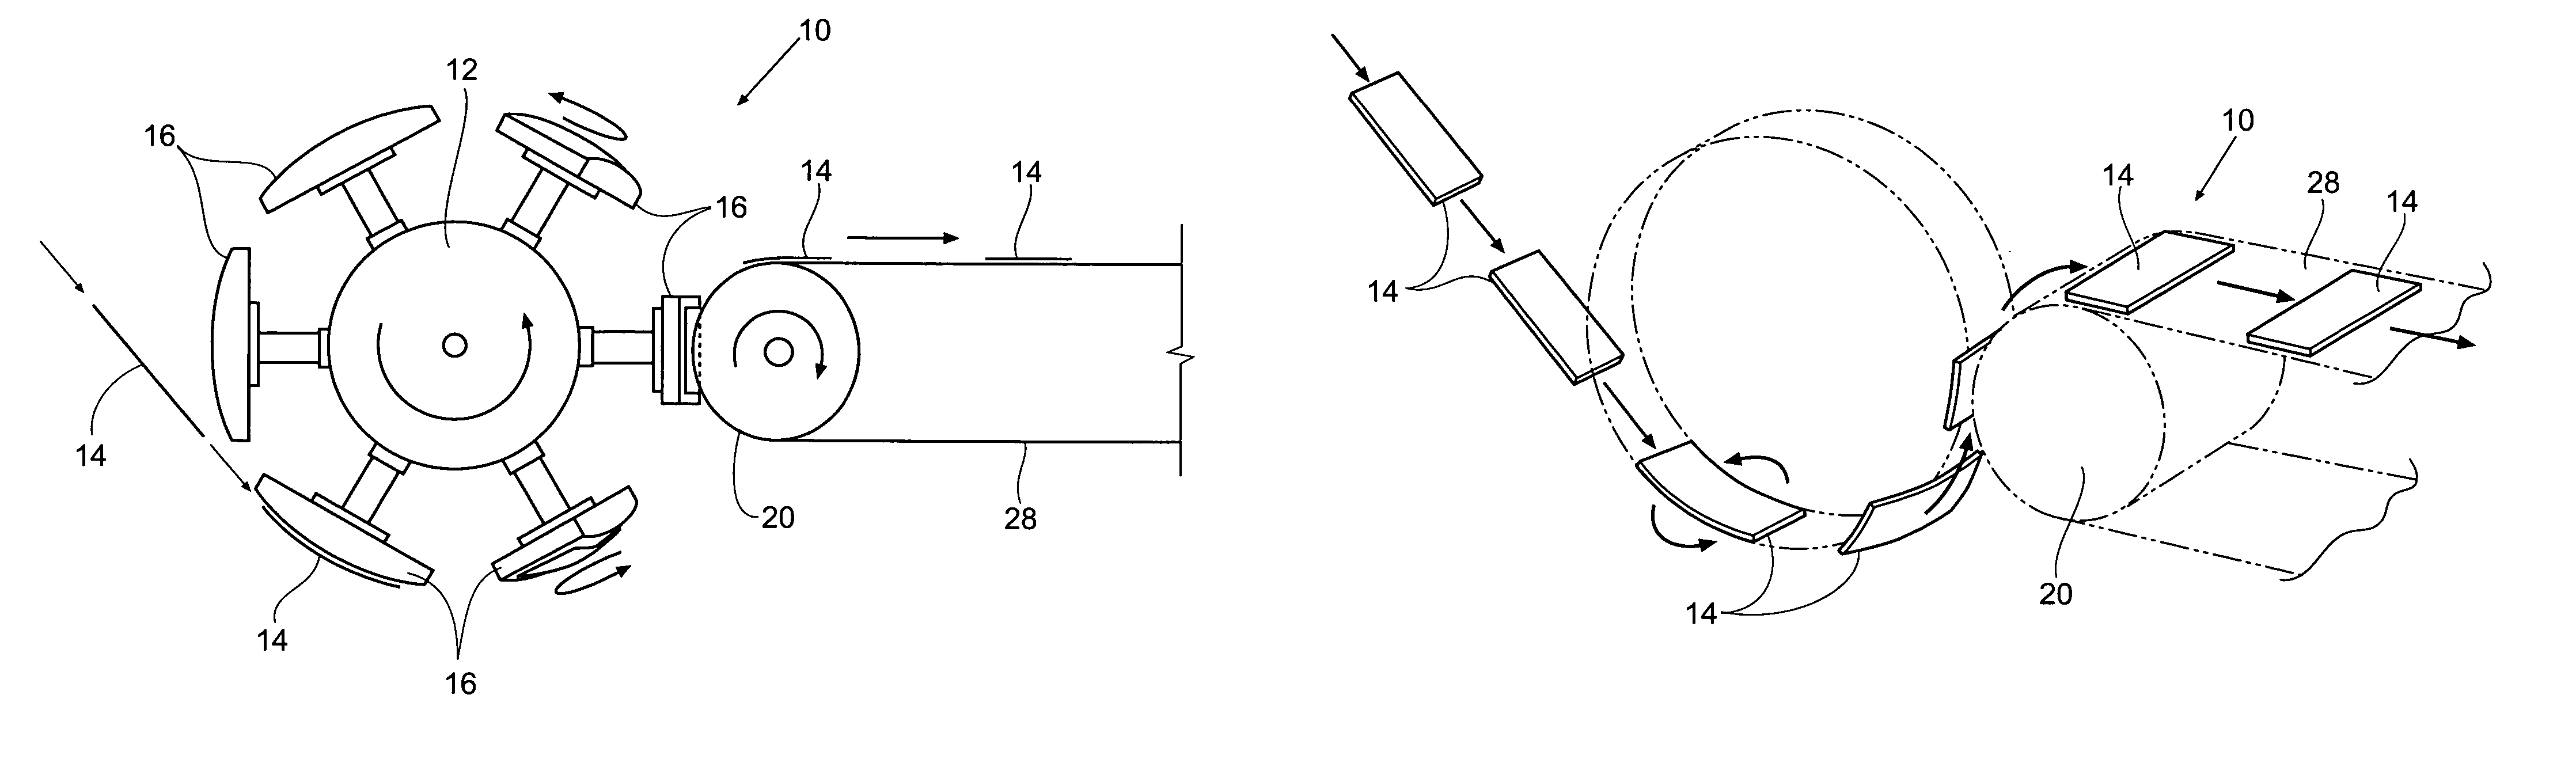 Article transfer and placement apparatus with active puck